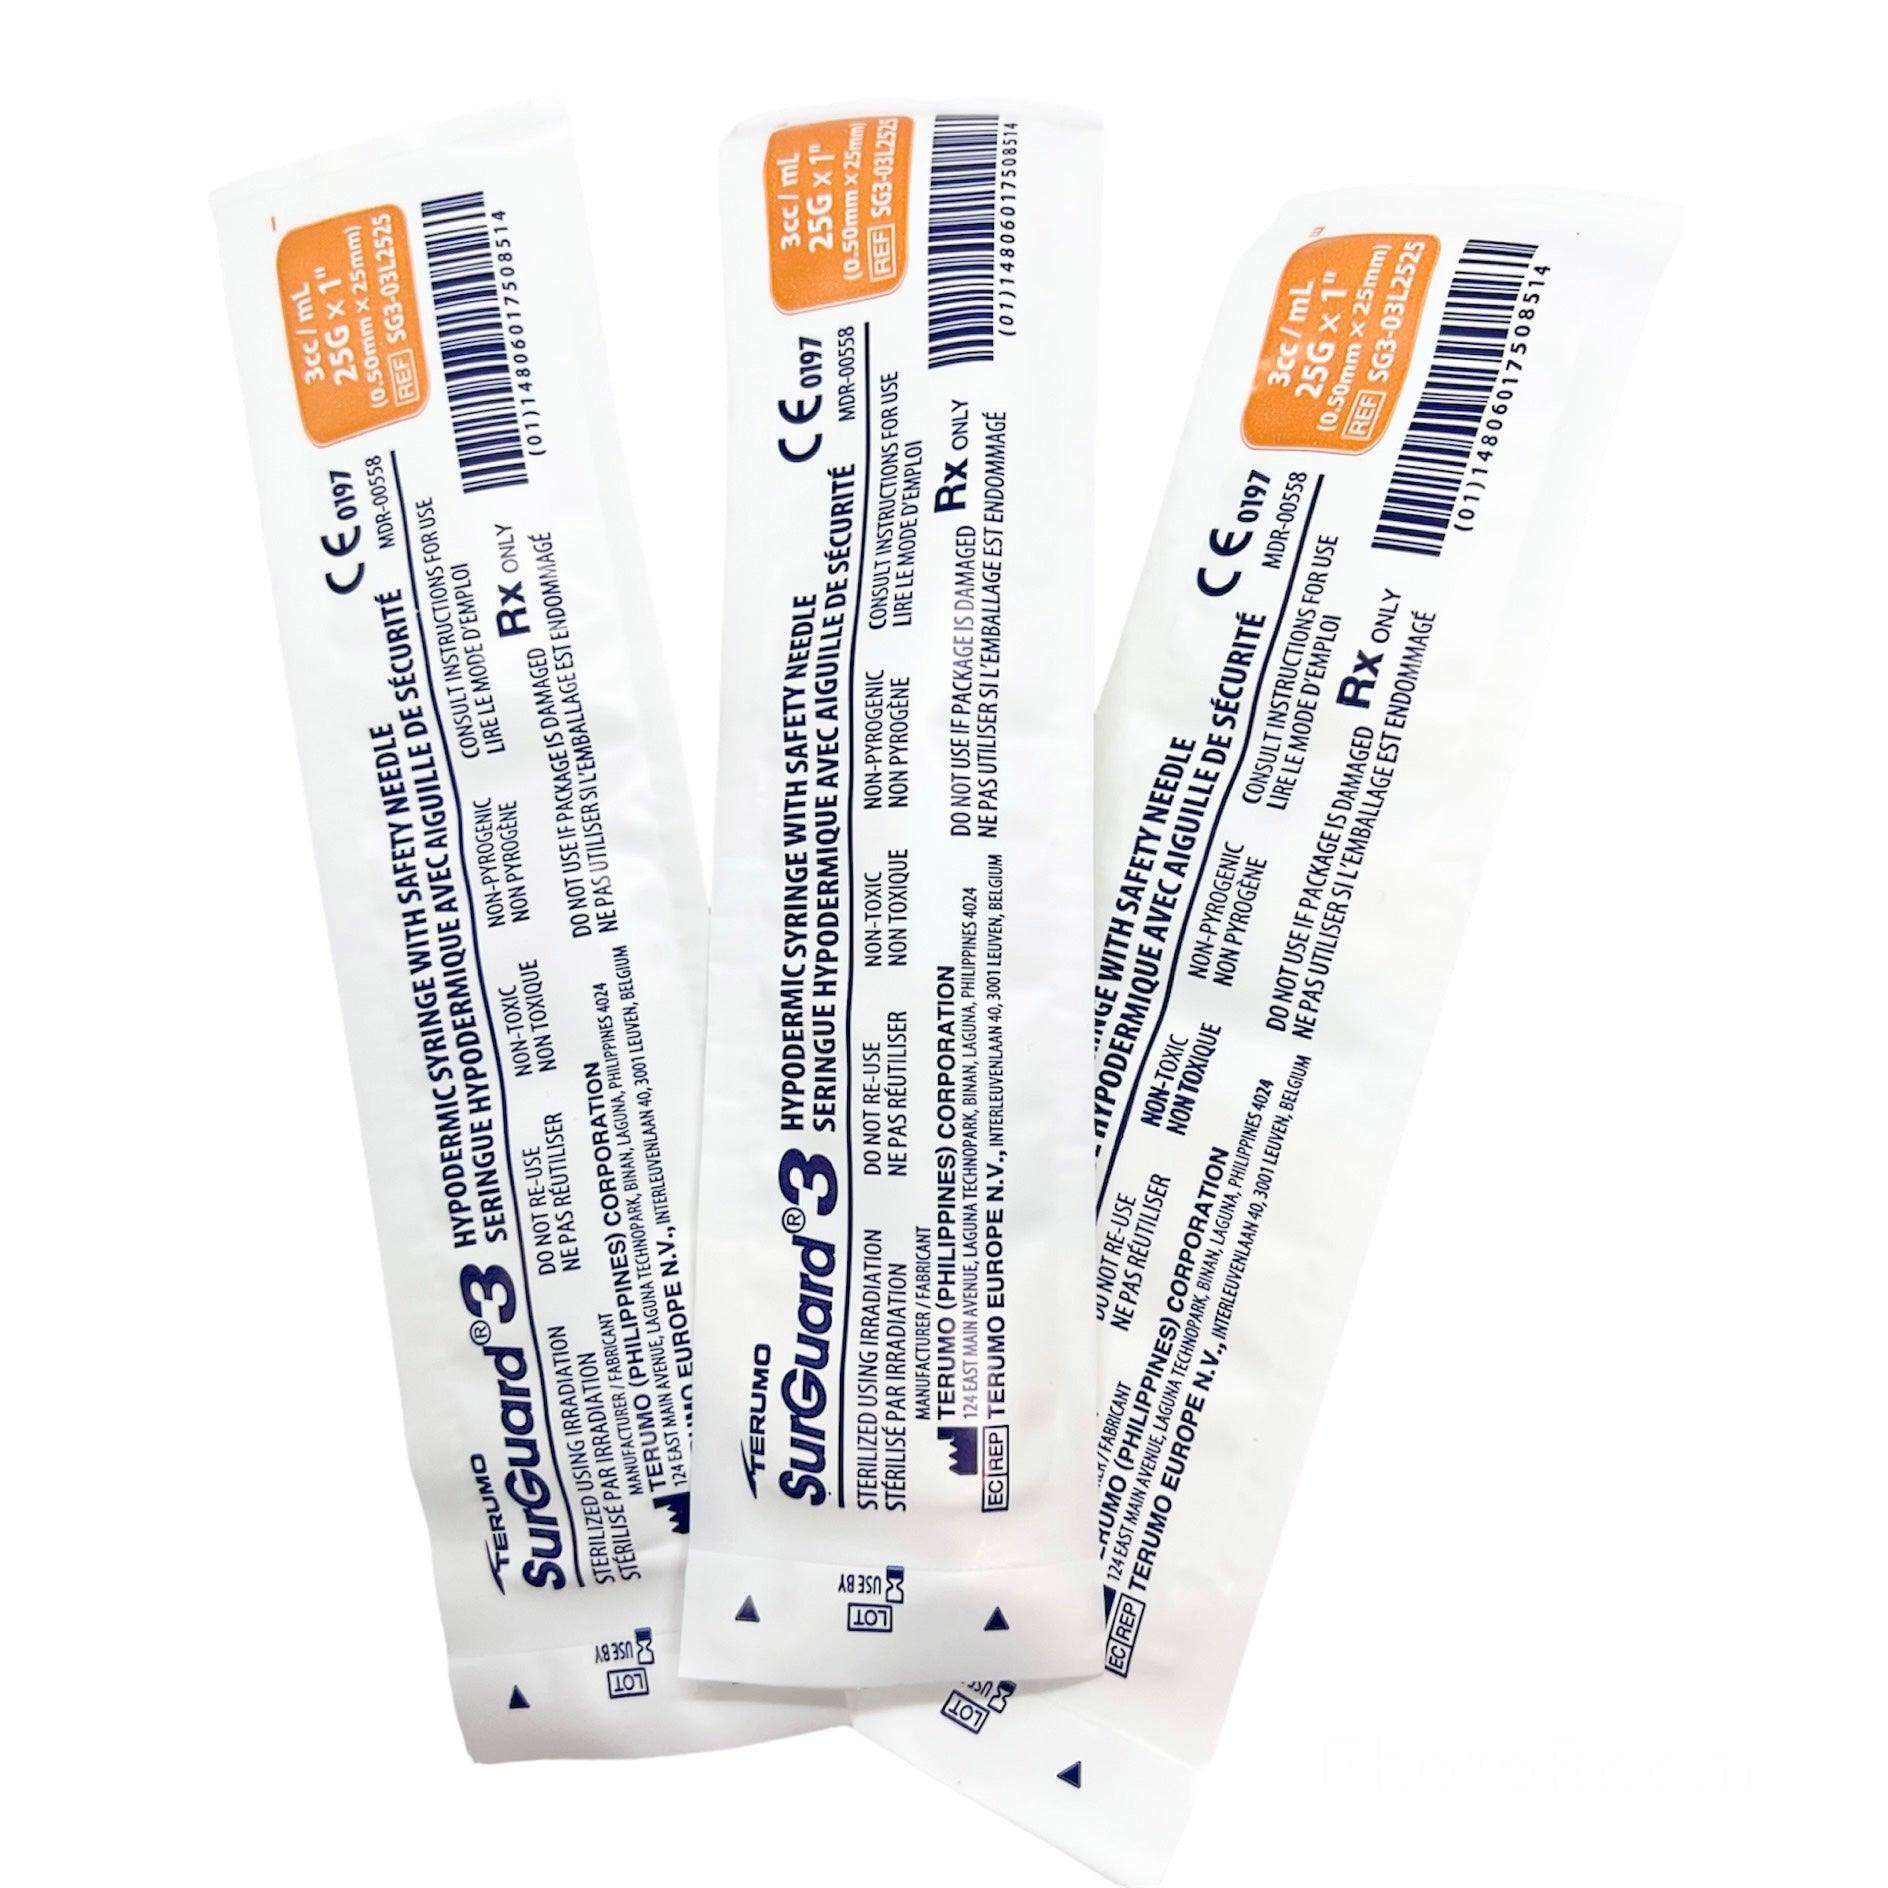 3 mL | 25G x 1" - Terumo SG3-03L2525 Hypodermic Syringes with Safety Needle | SurGuard 3 | 100 per Box